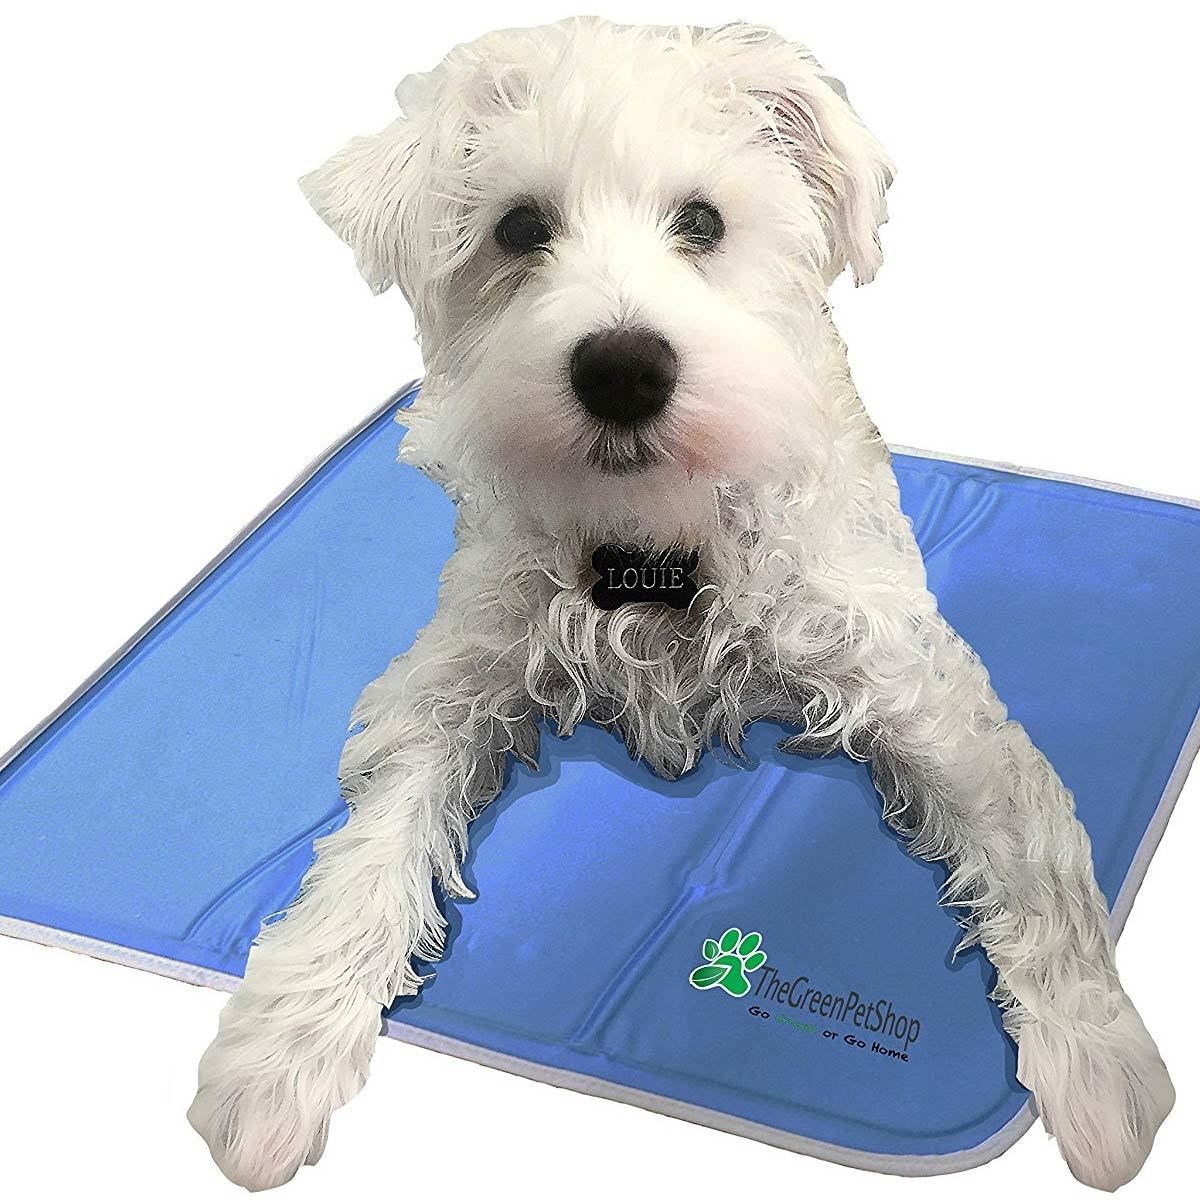 Warming or Cooling Pad for Your Pet